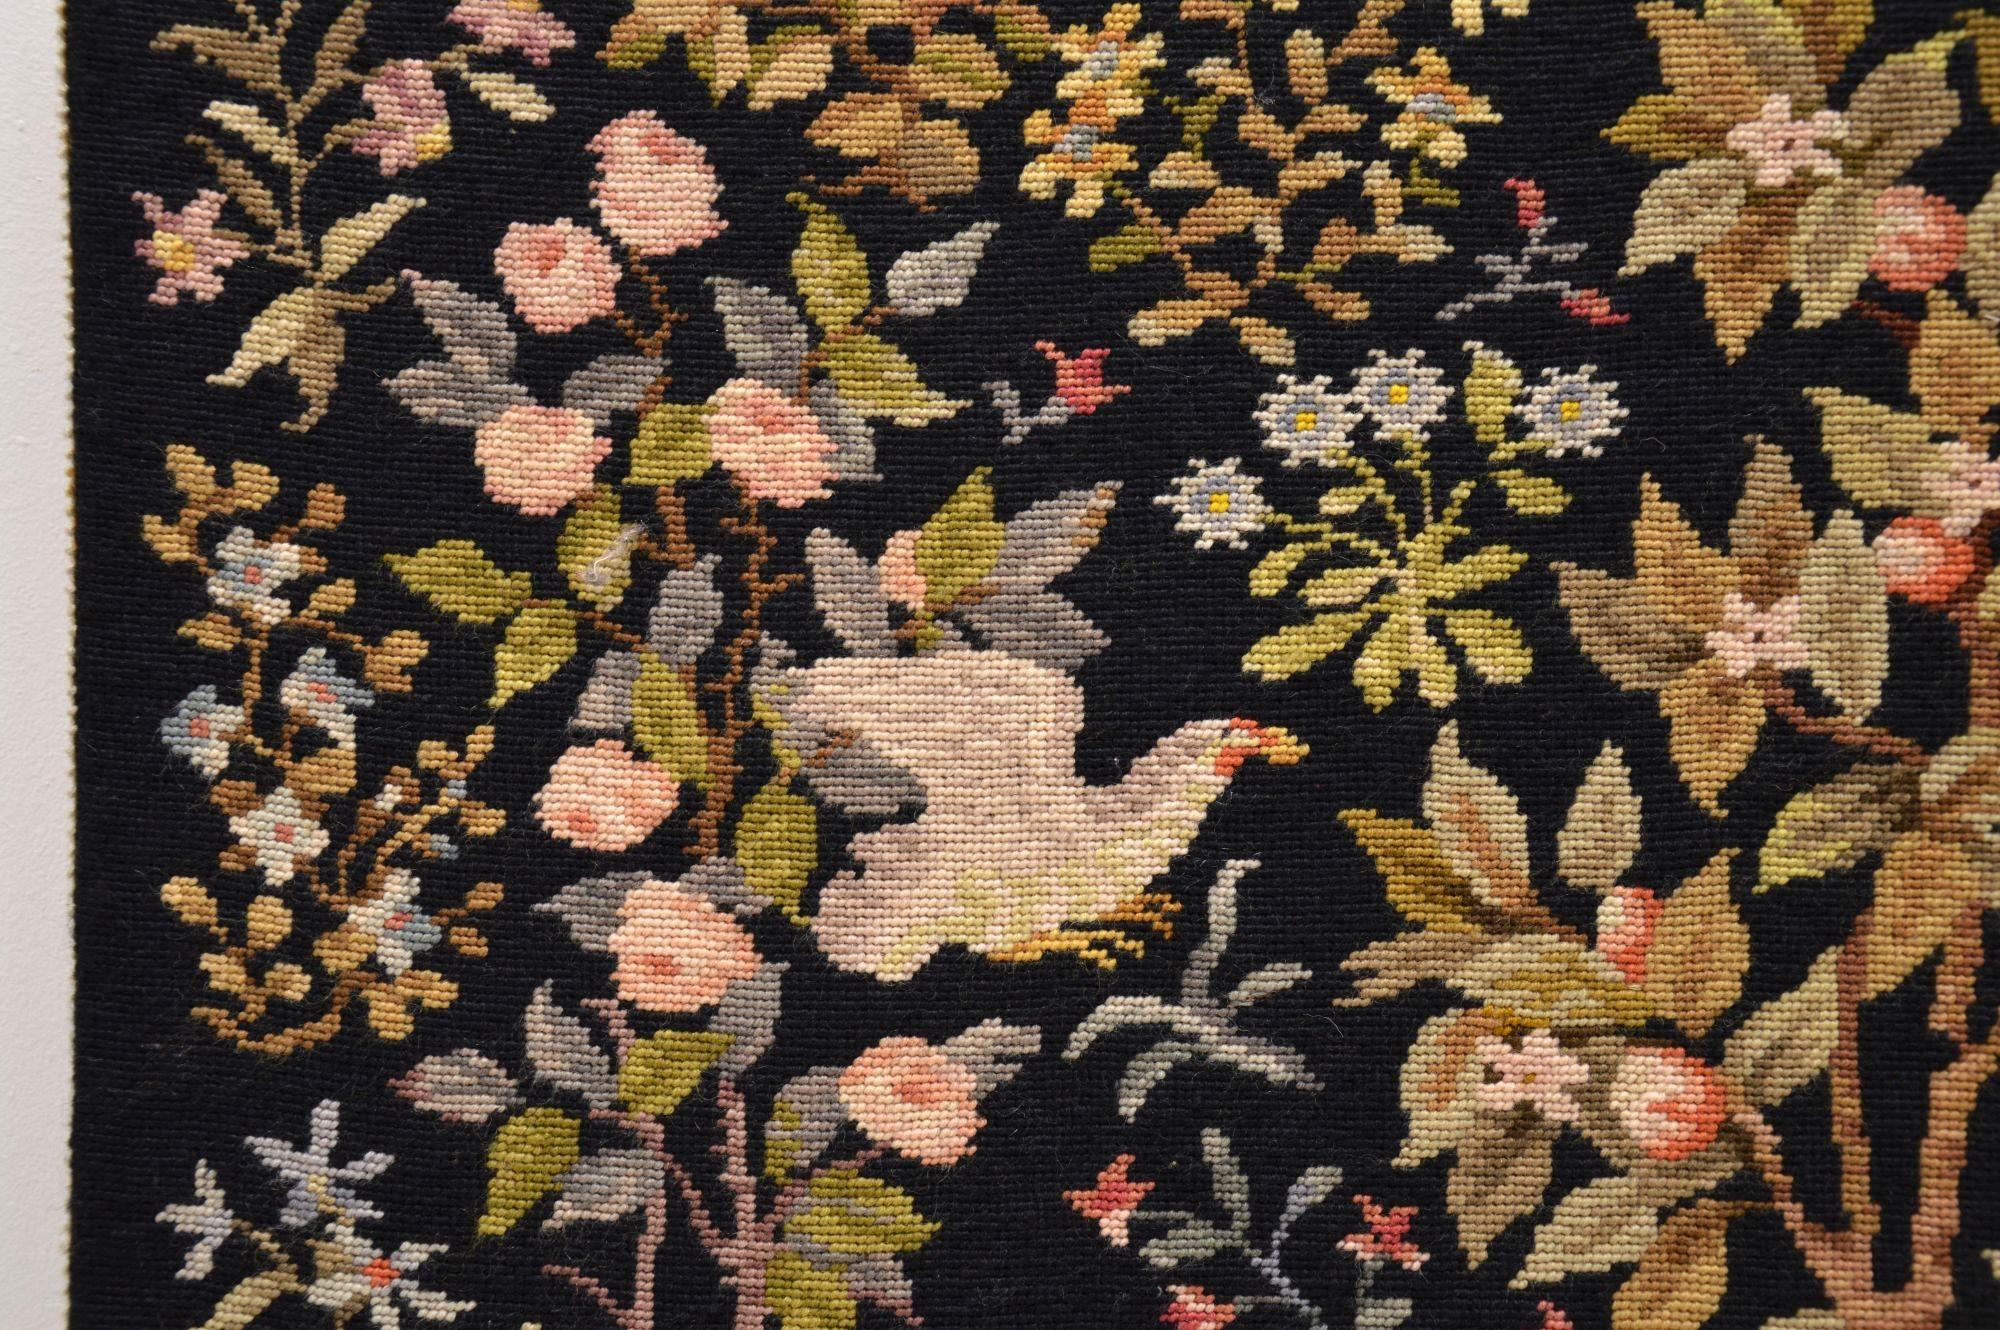 Antique Hand Stitched Tapestry 2